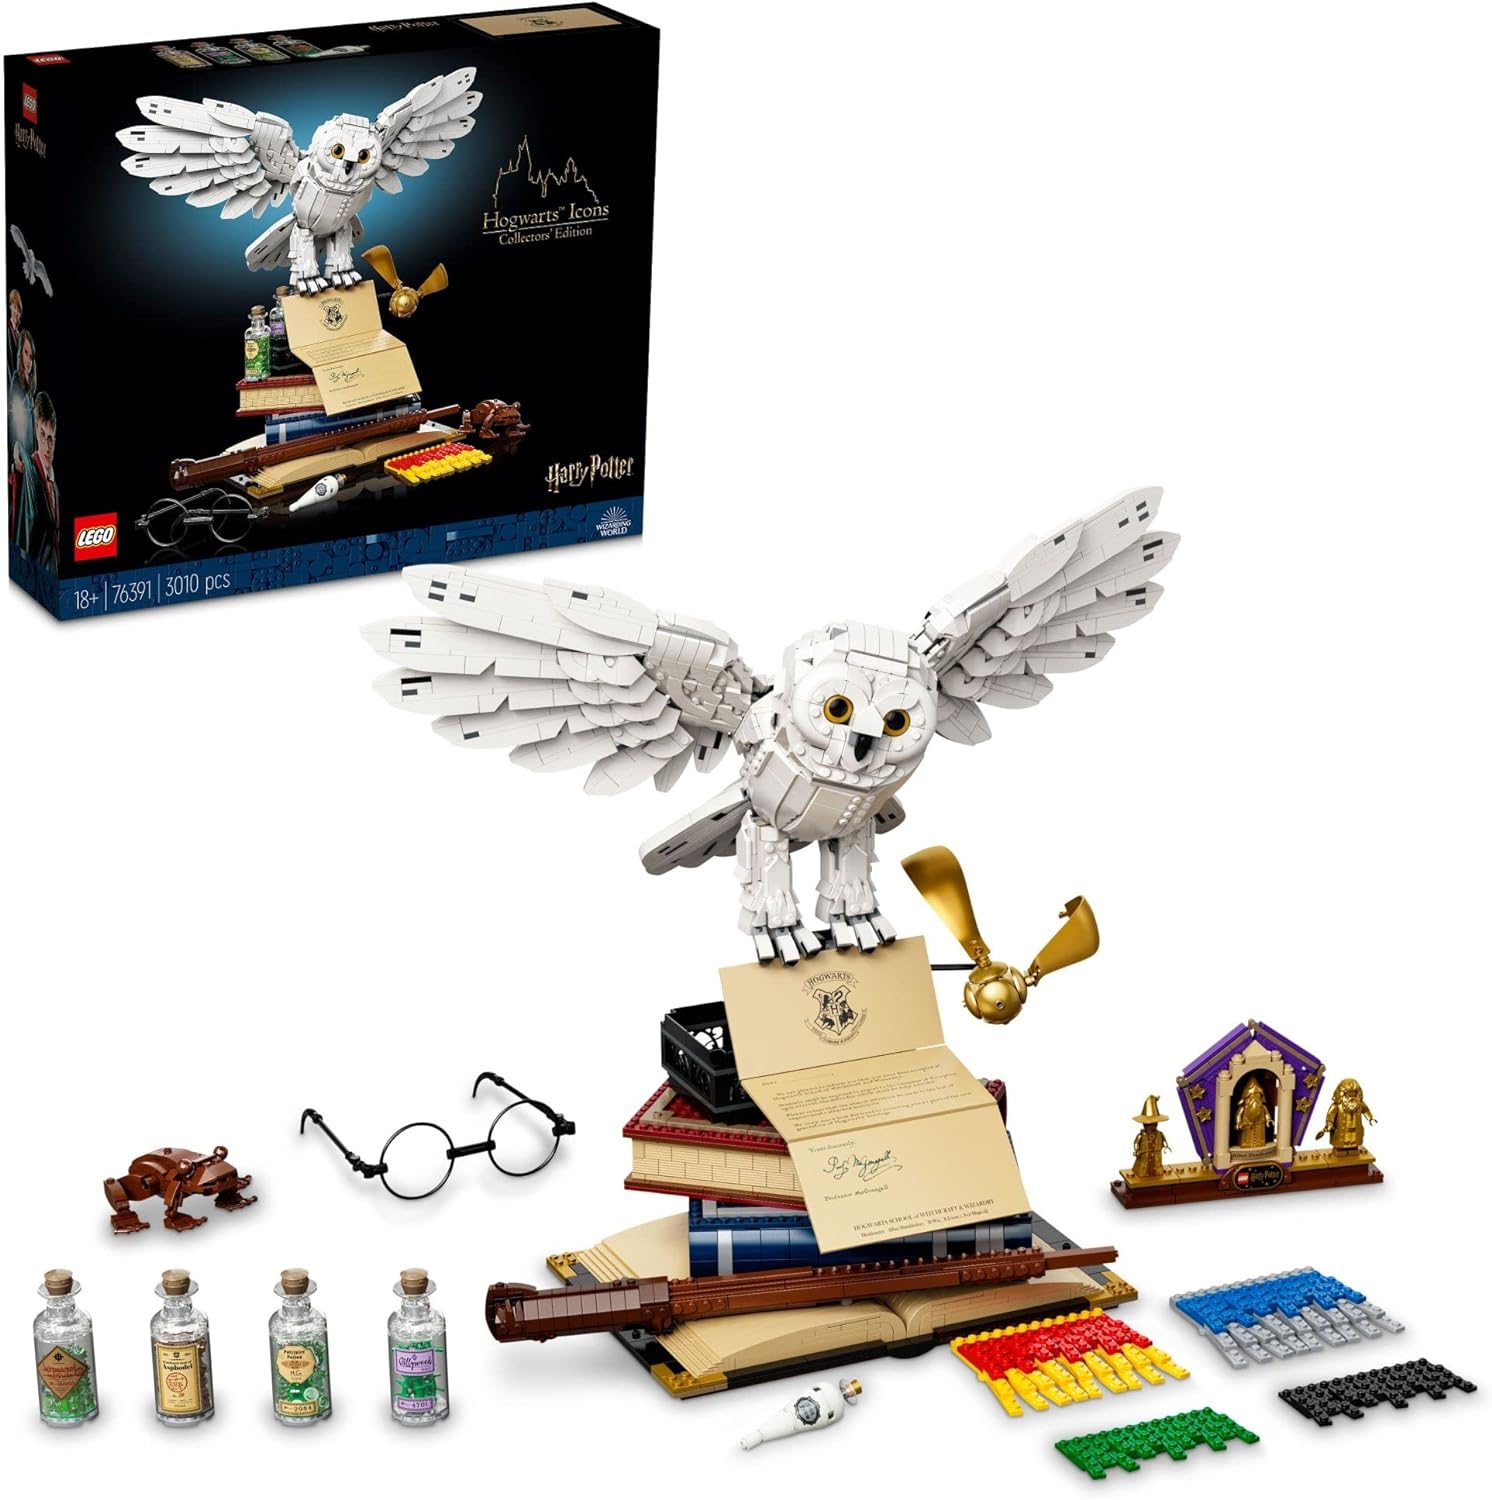 LEGO Harry Potter Hogwarts Icons - Collectors Edition 76391 20th Anniversary Collectable Hedwig Owl Model, with 3 Exclusive Golden Minifigures: Dumbledore, McGonagall and Hagrid; Great Gift Idea